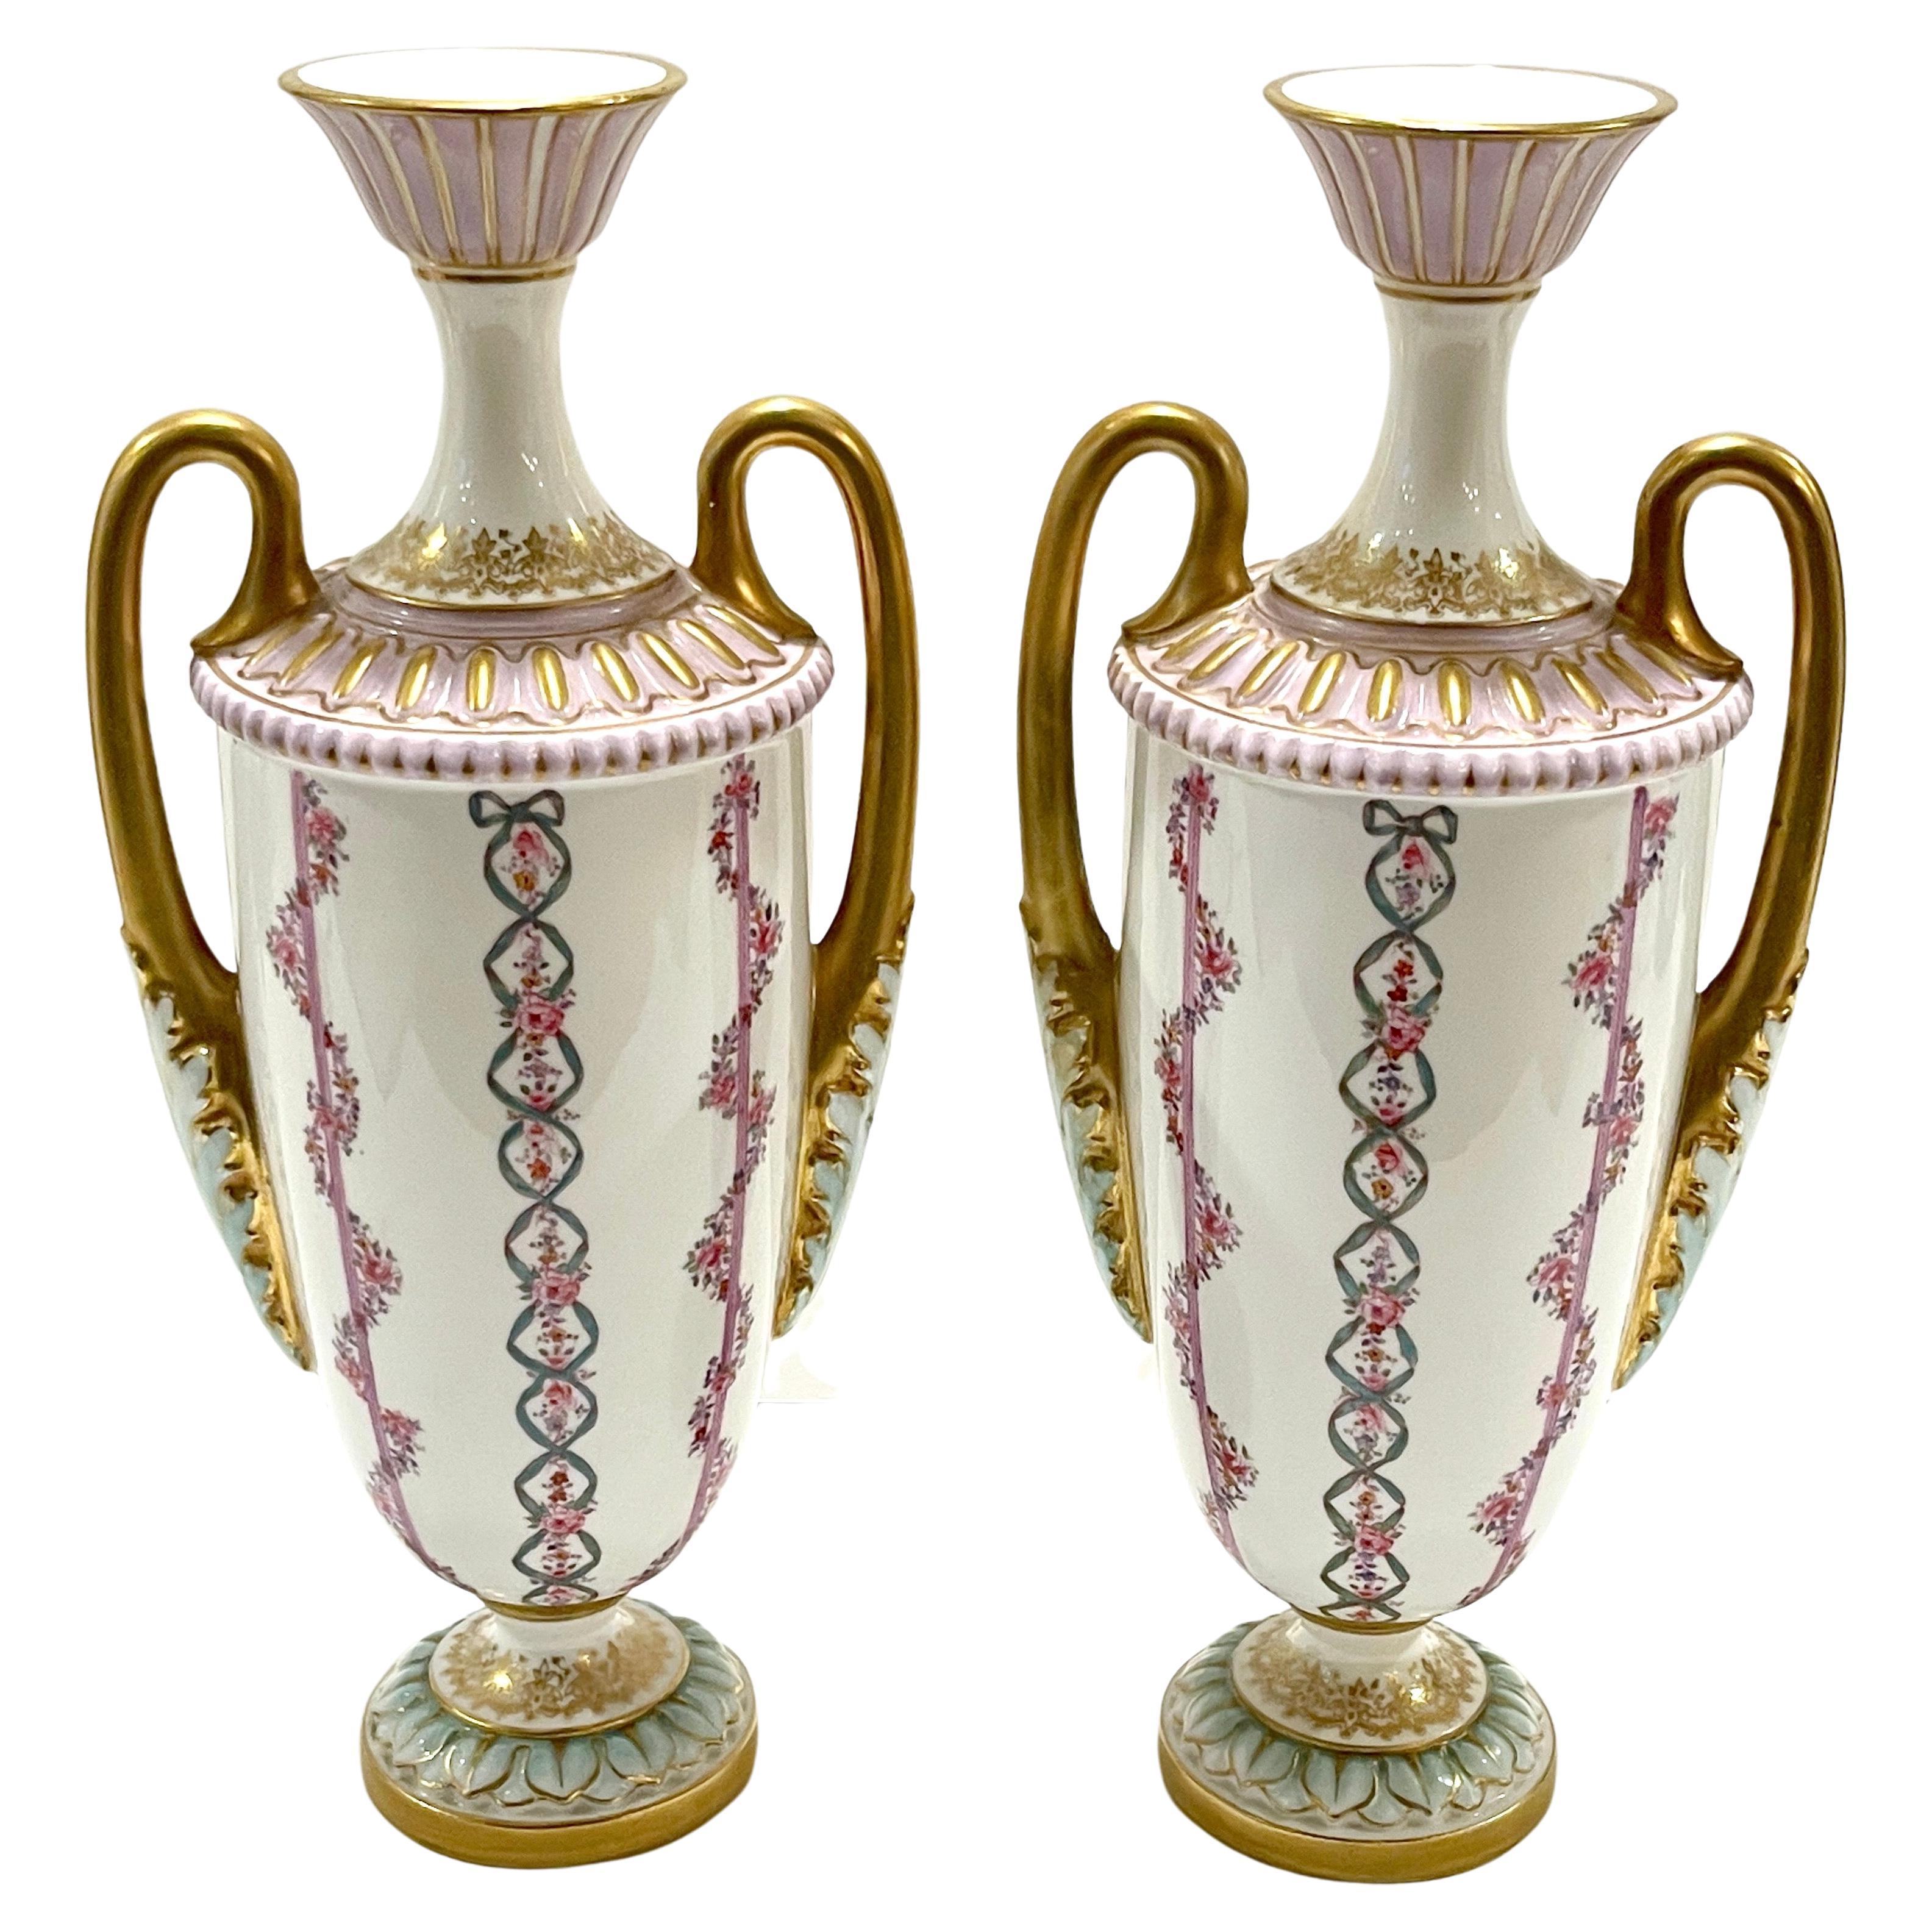 Pair of Royal Worcester Transitional Neoclassical Style Vases, England, 1901